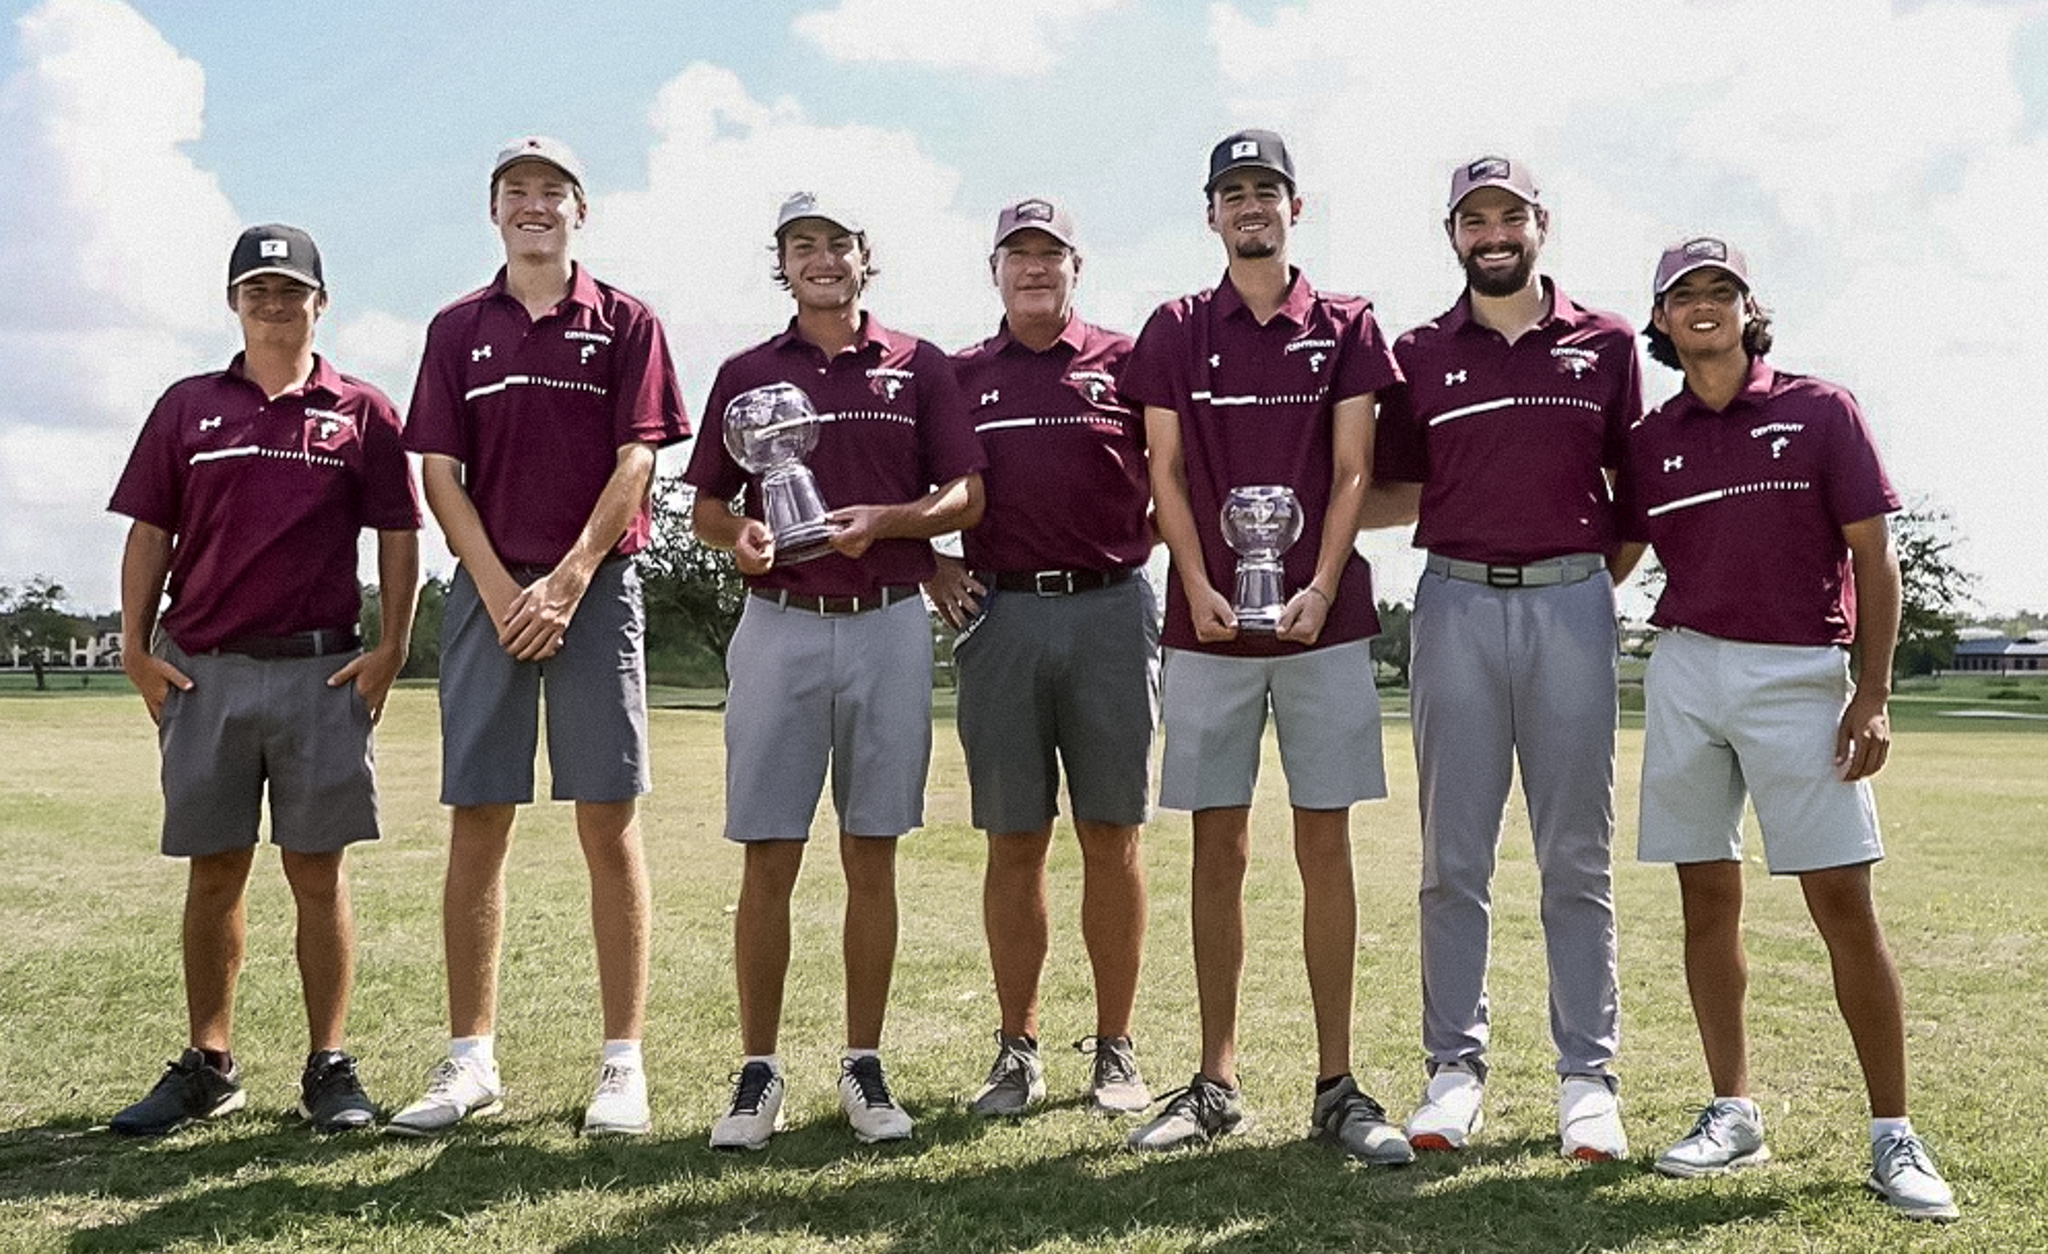 The Gents opened their season with a sixth-place finish highlighted by Andrew Bennett's individual title.